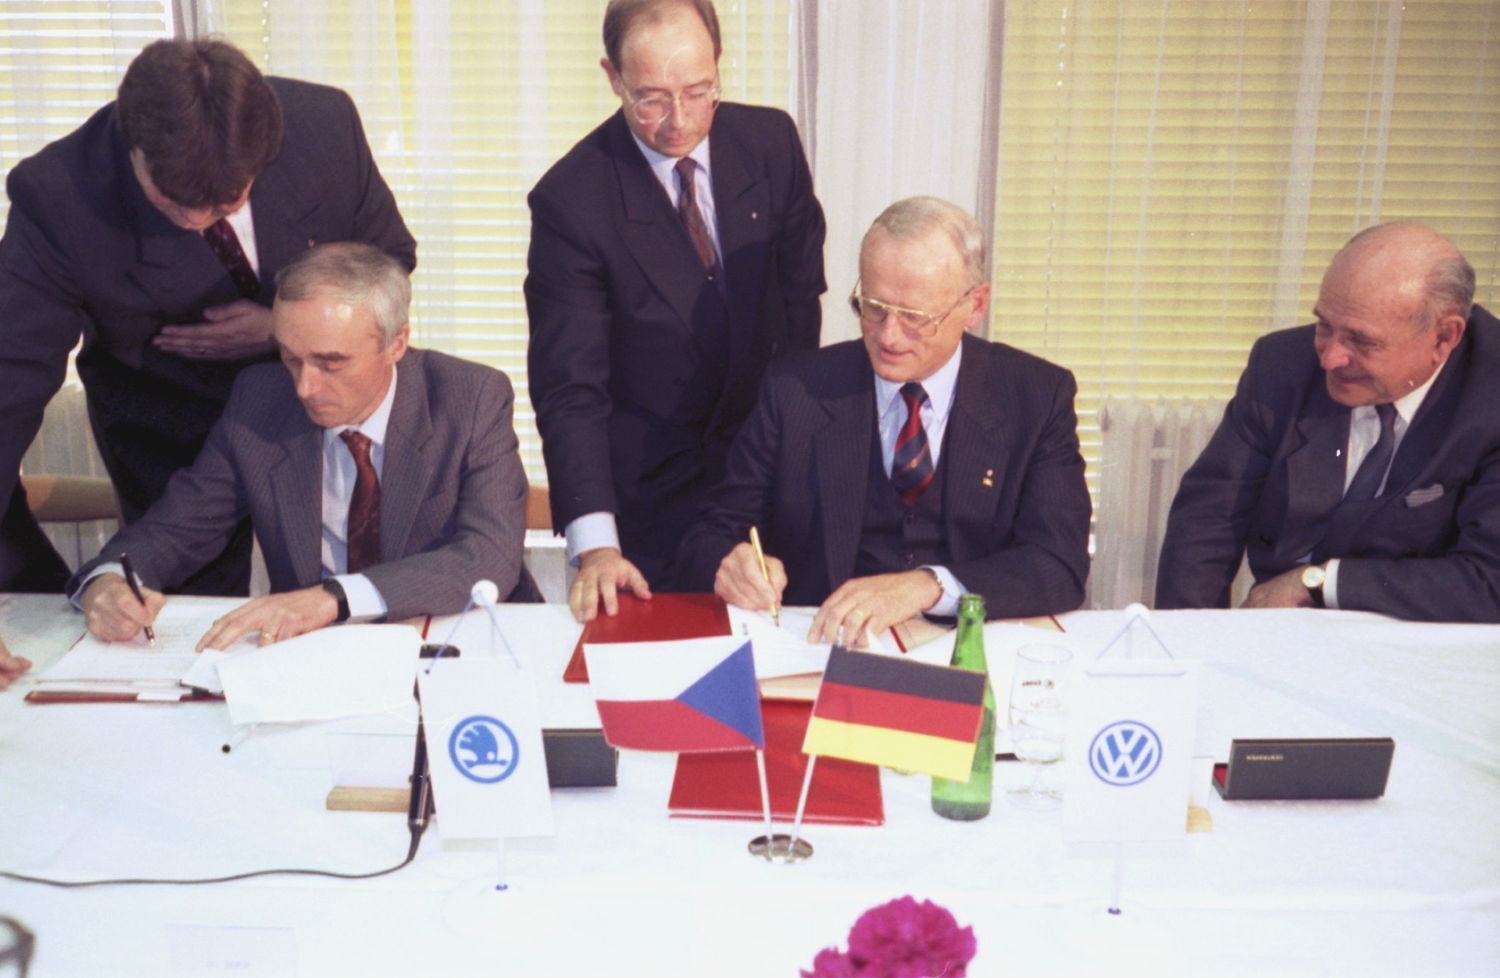 On 28 March 1991, the Czech Minister of Industry, Jan Vrba, and the Chairman of the Board of Management of the Volkswagen Group, Carl H. Hahn, signed the contract establishing a joint venture for the production of ŠKODA cars. The contracting parties were the government of the Czech Republic and the Volkswagen Group.